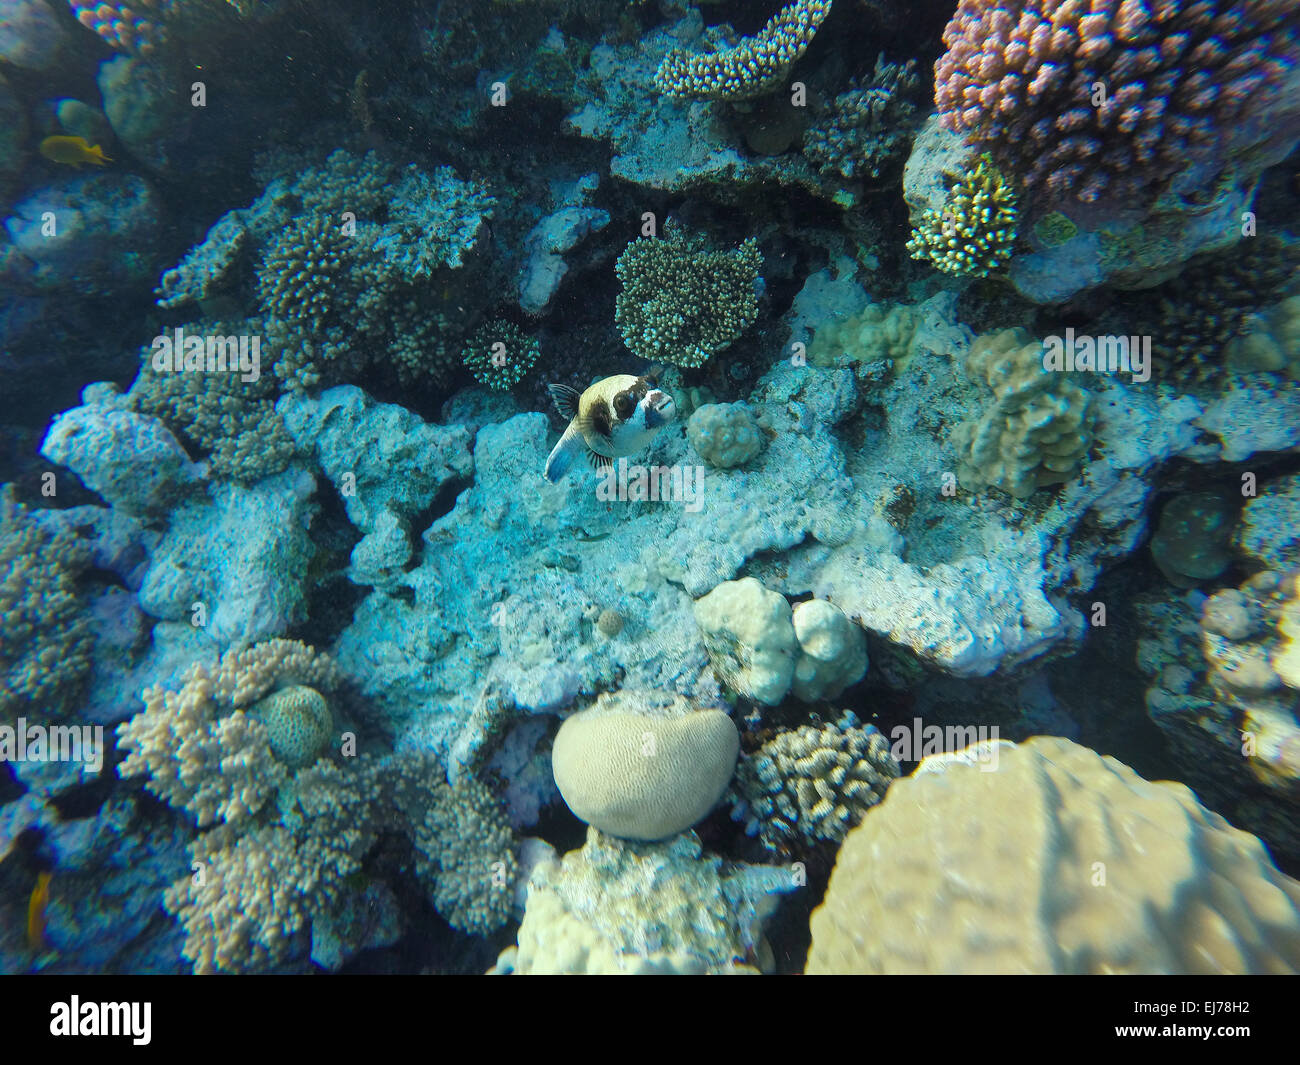 red sea coral reef with hard corals and fishes - underwater photo Stock Photo